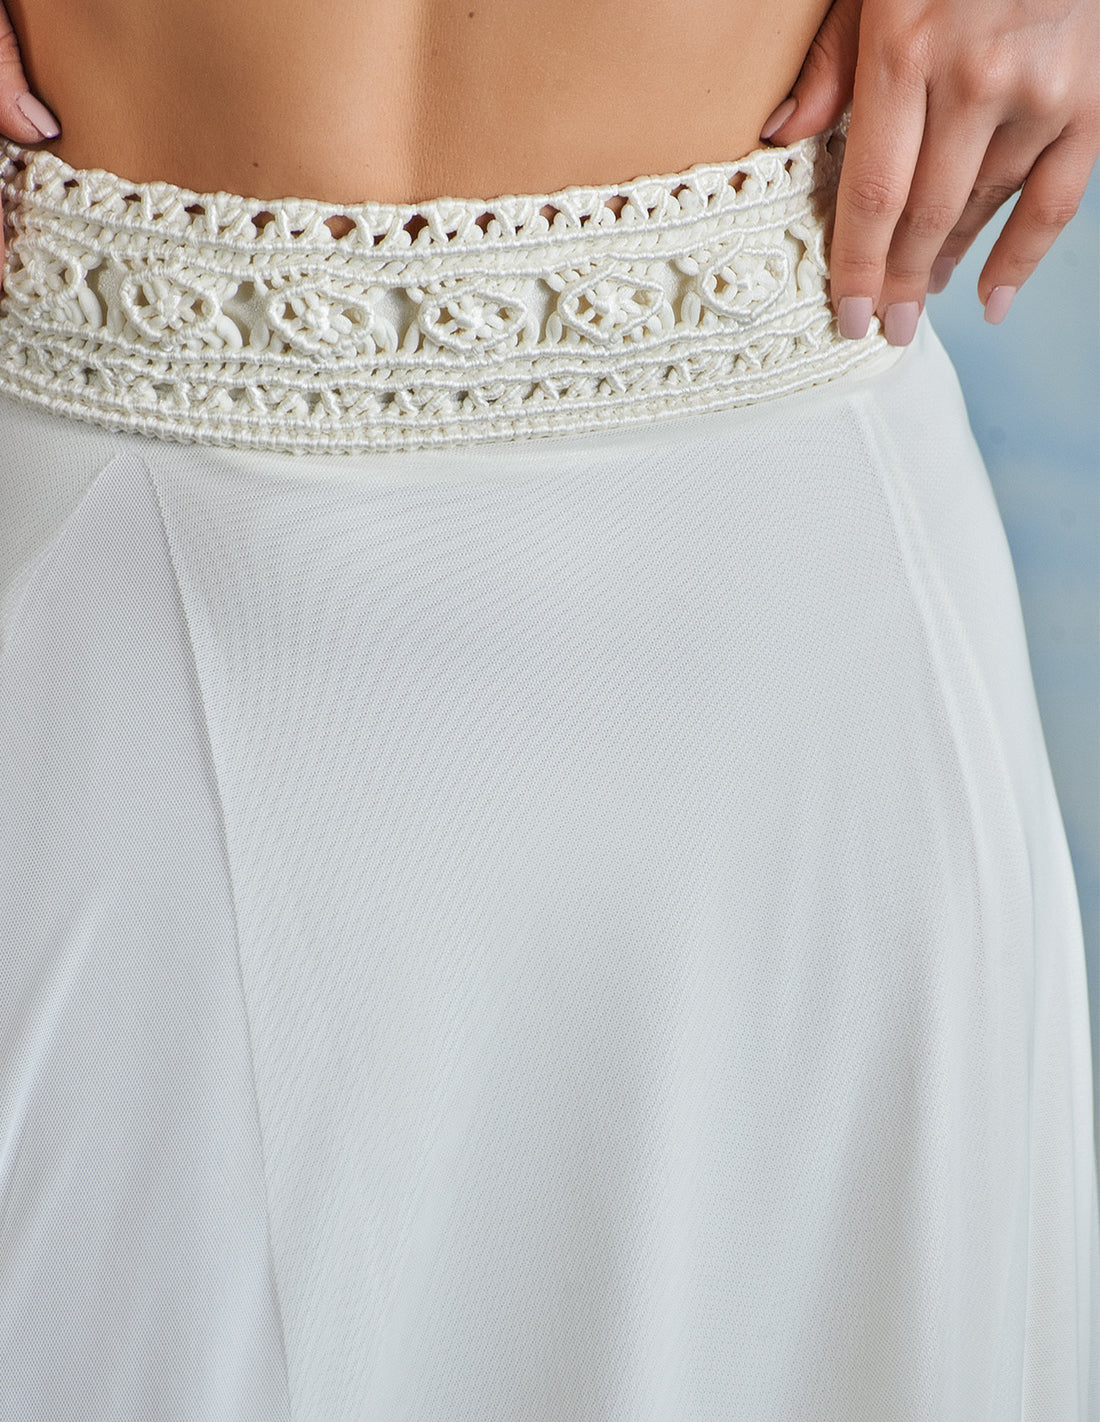 Crown Skirt Ivory. Beach Skirt With Hand Woven Macramé In Ivory. Entreaguas